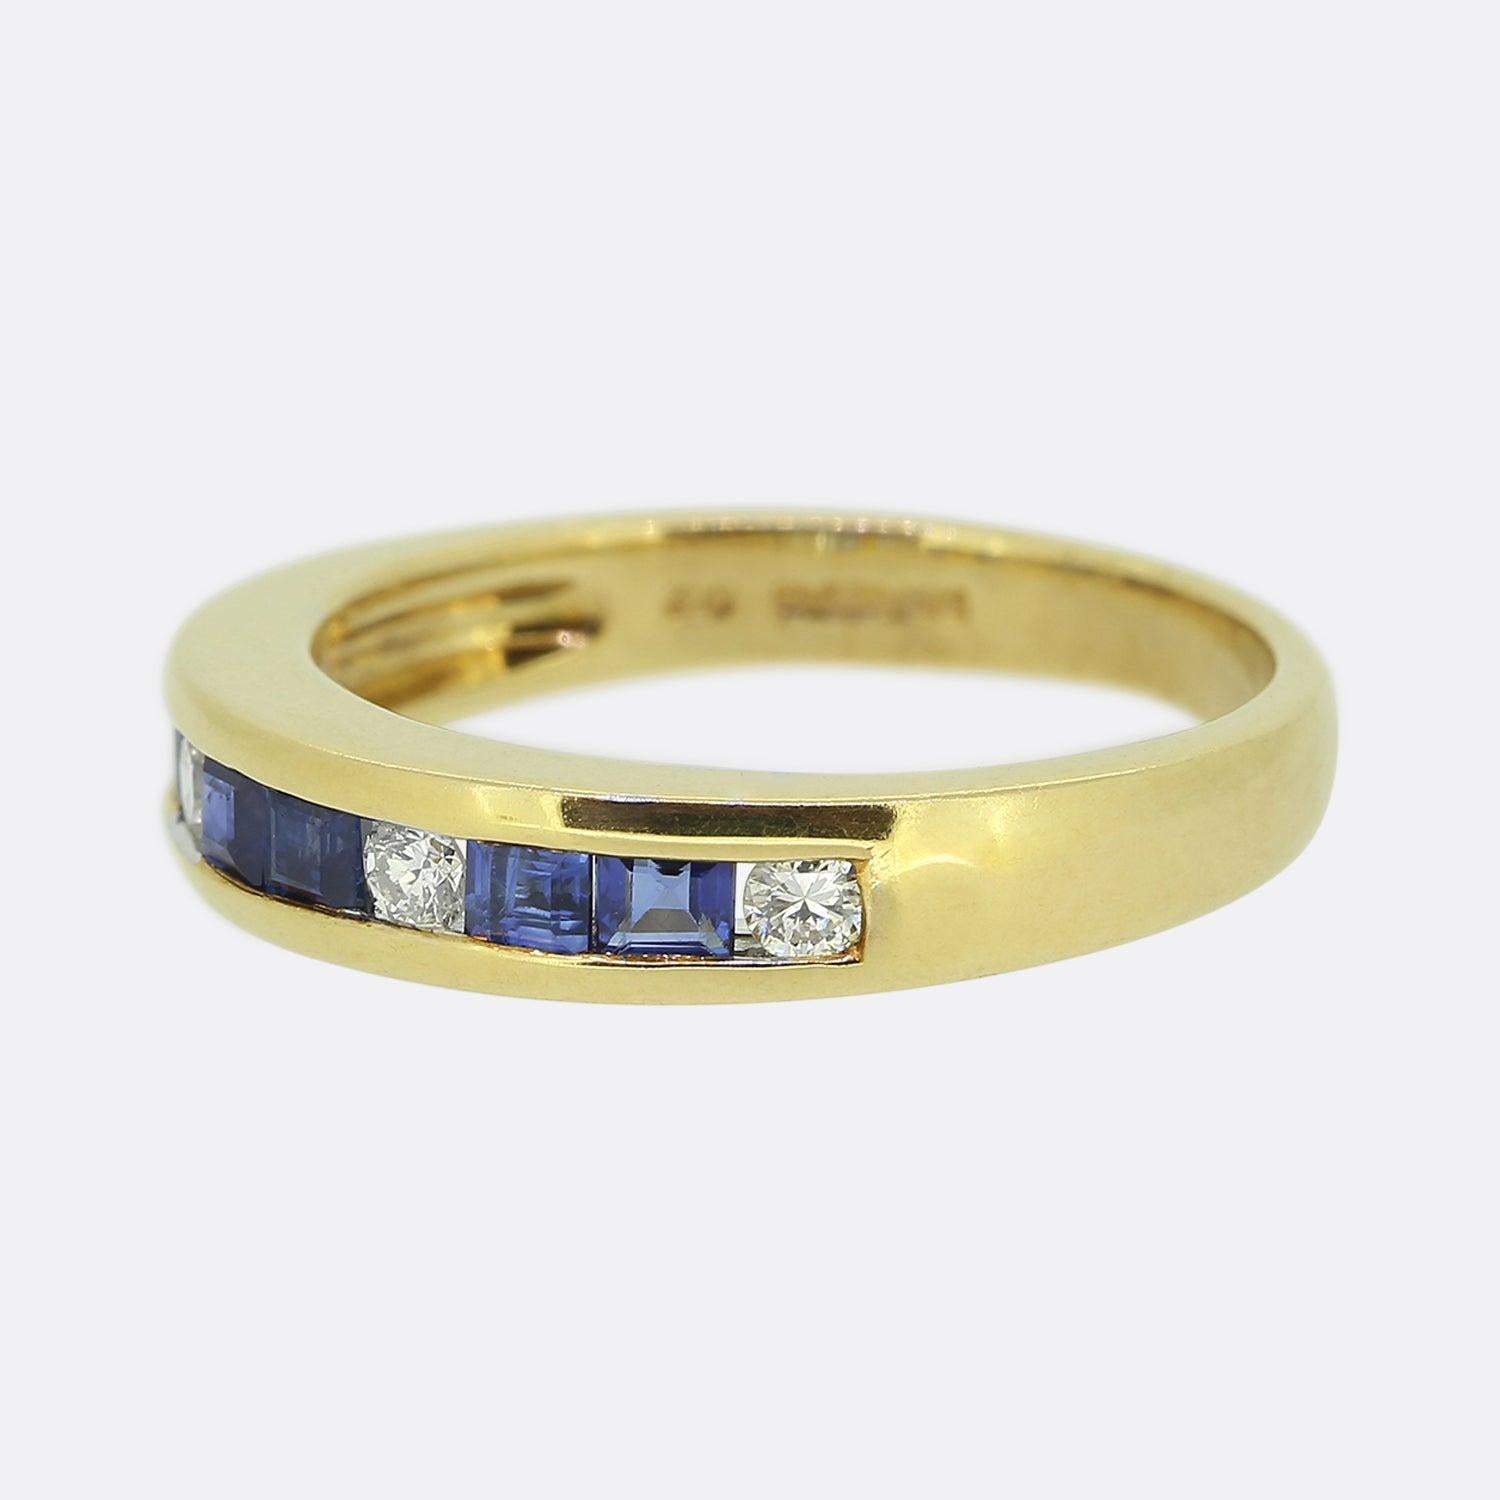 Here we have a classically styled sapphire and diamond band ring. An 18ct yellow gold mount plays host to an alternating array of paired square calibrated sapphires and single round brilliant cut diamonds. All stones have been neatly rub-over set in